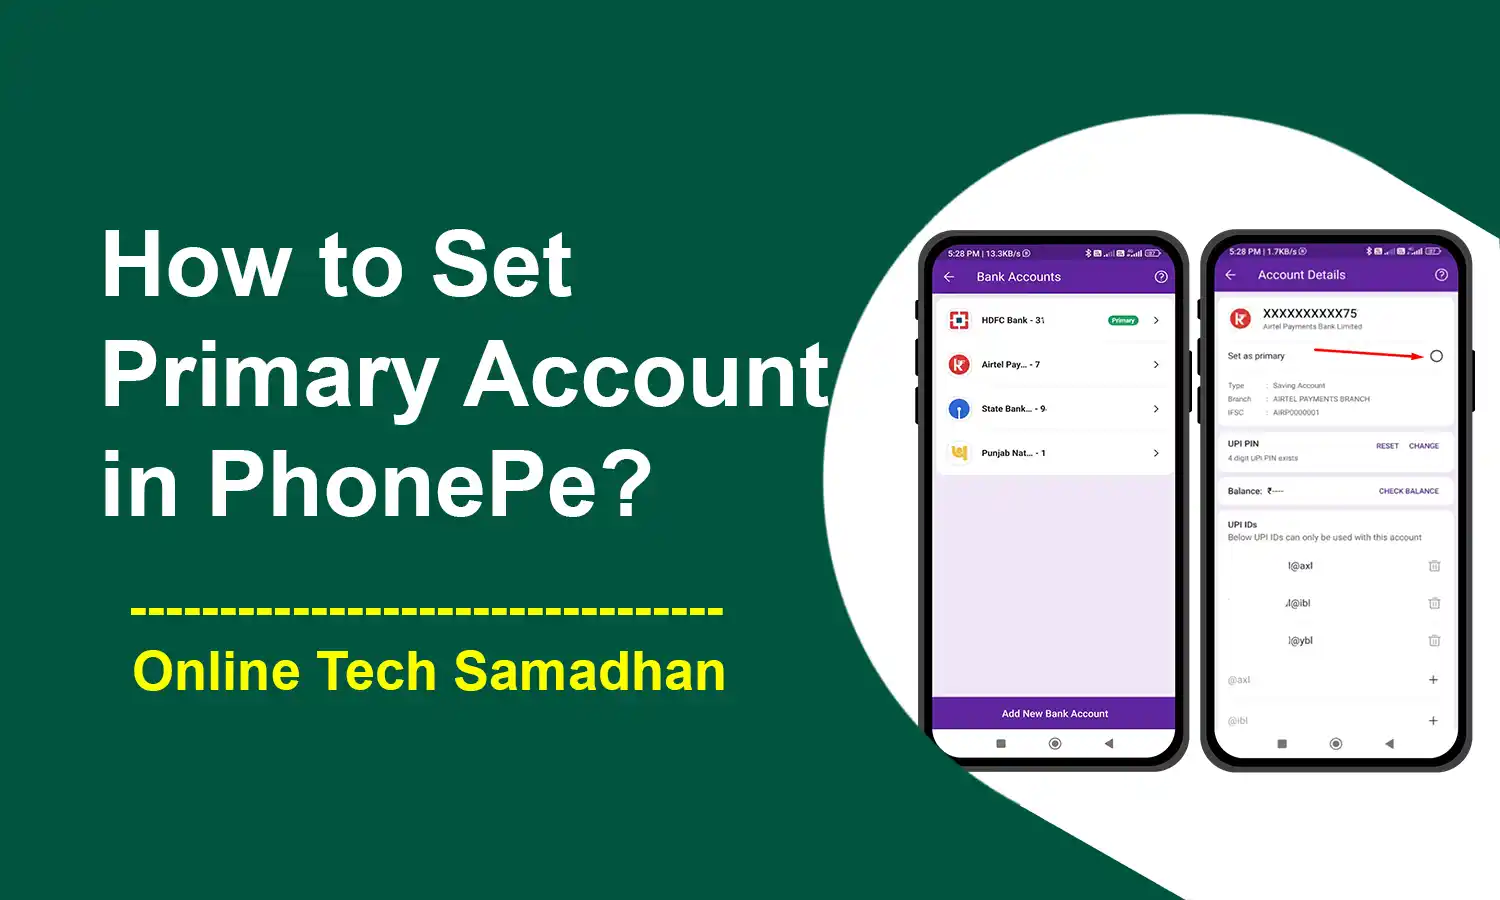 How to Set Primary Account in PhonePe